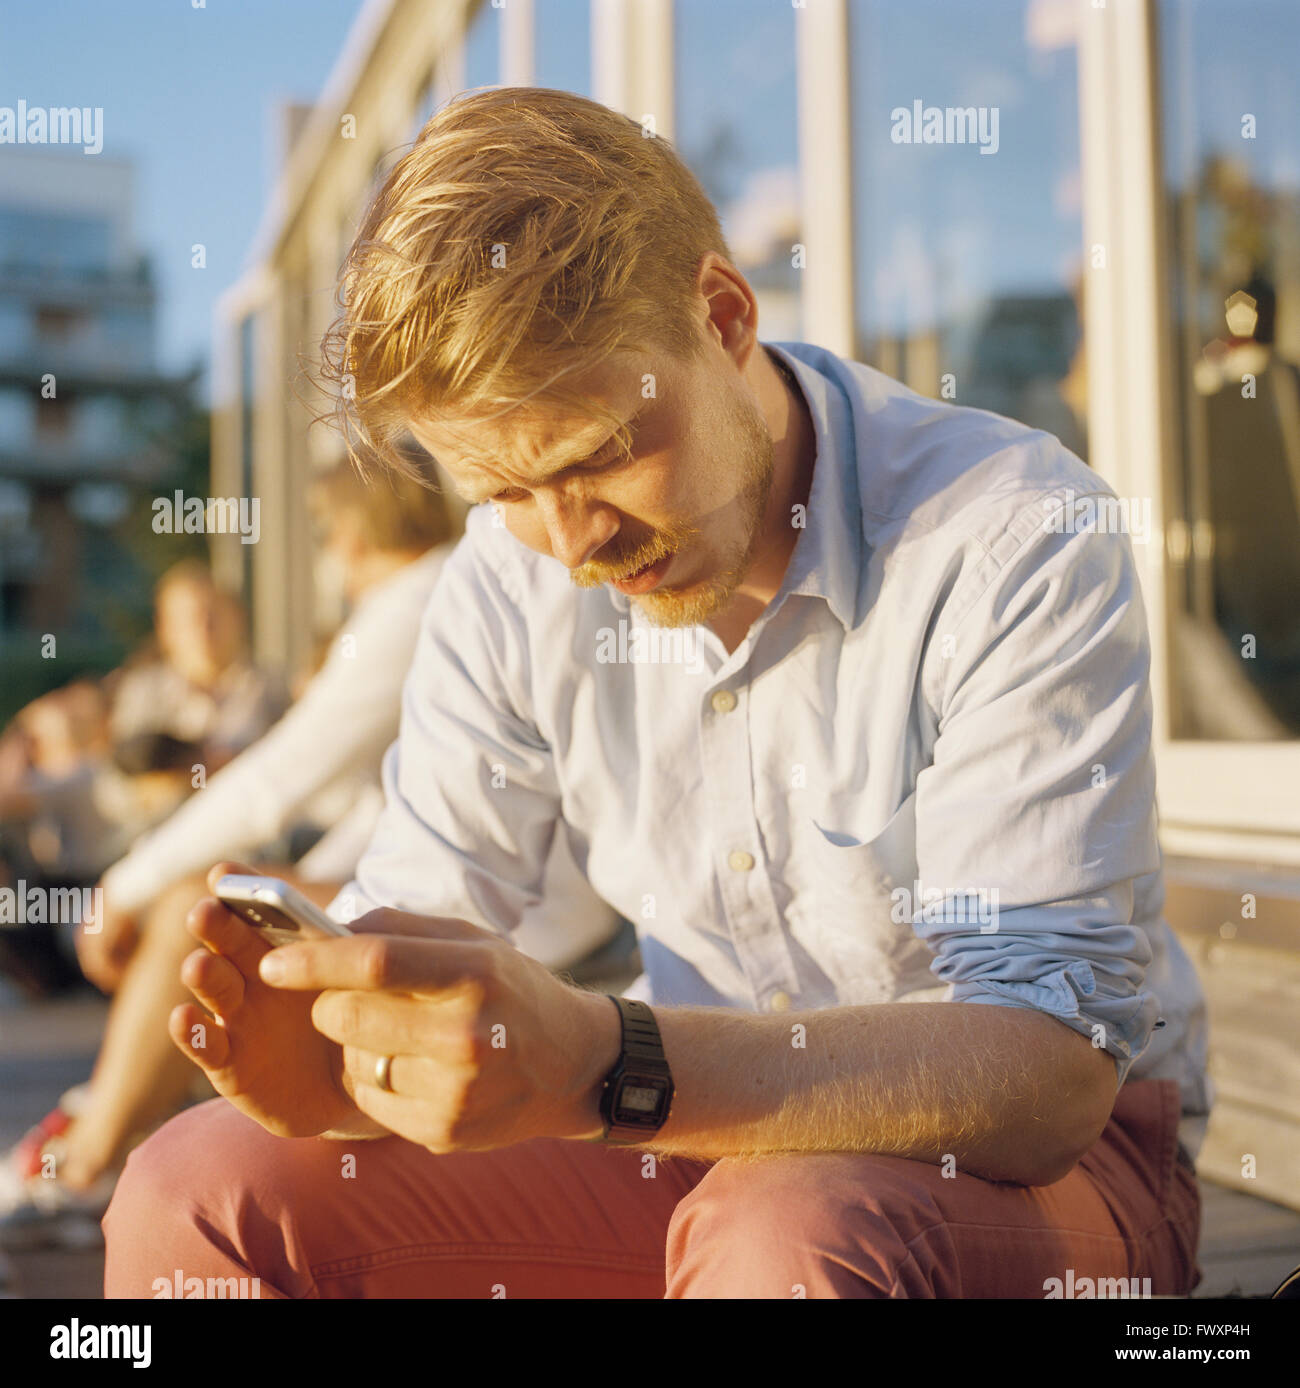 Sweden, Stockholm, Mid adult man using mobile phone Stock Photo